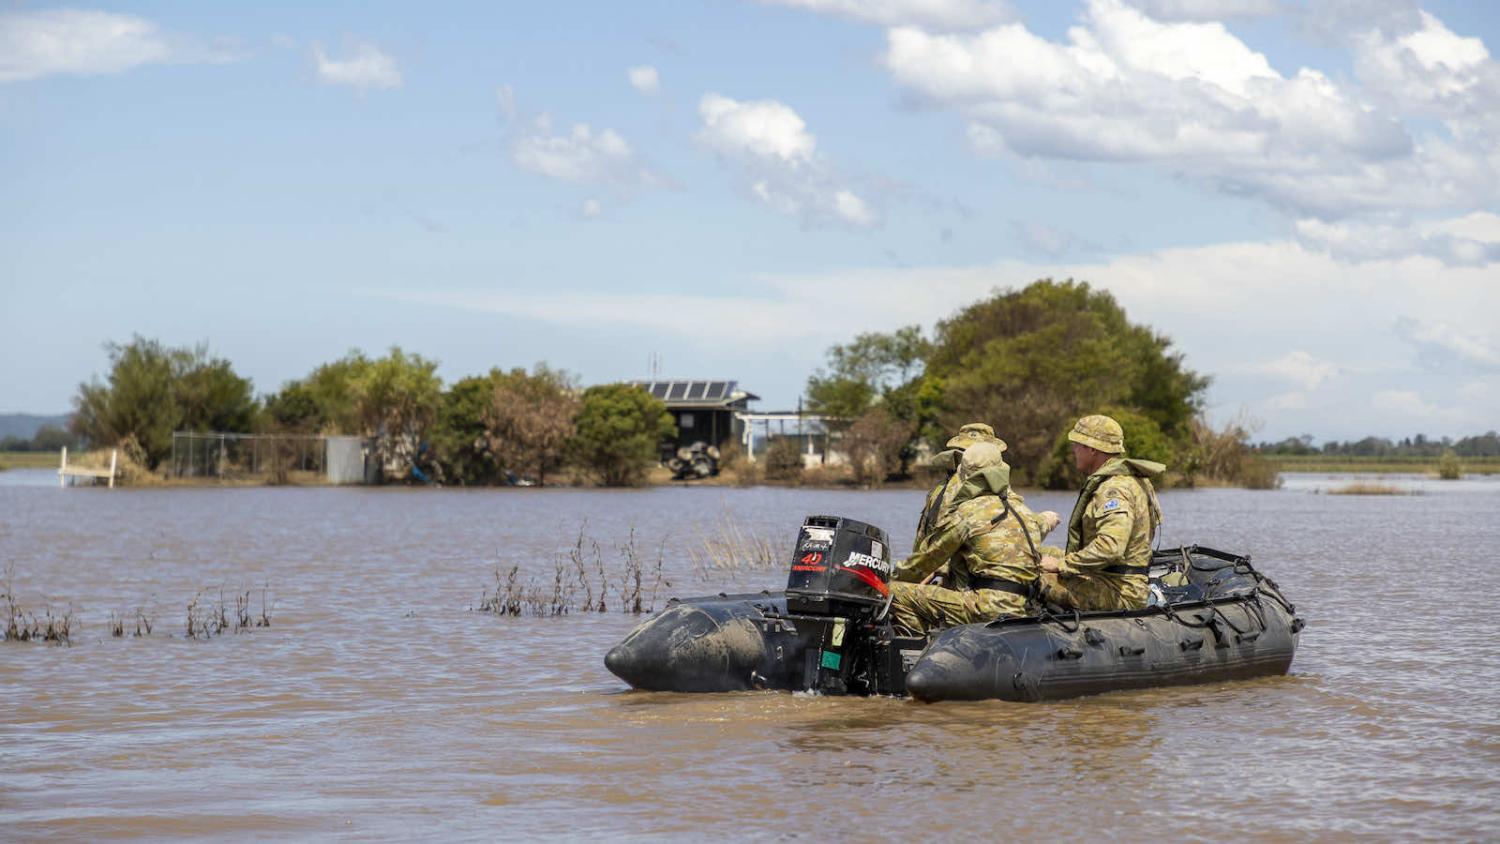 Before we “bring in” the troops for disaster assistance for good, key questions about the capabilities and limitations of ADF engagement need to be addressed (Defence Department)